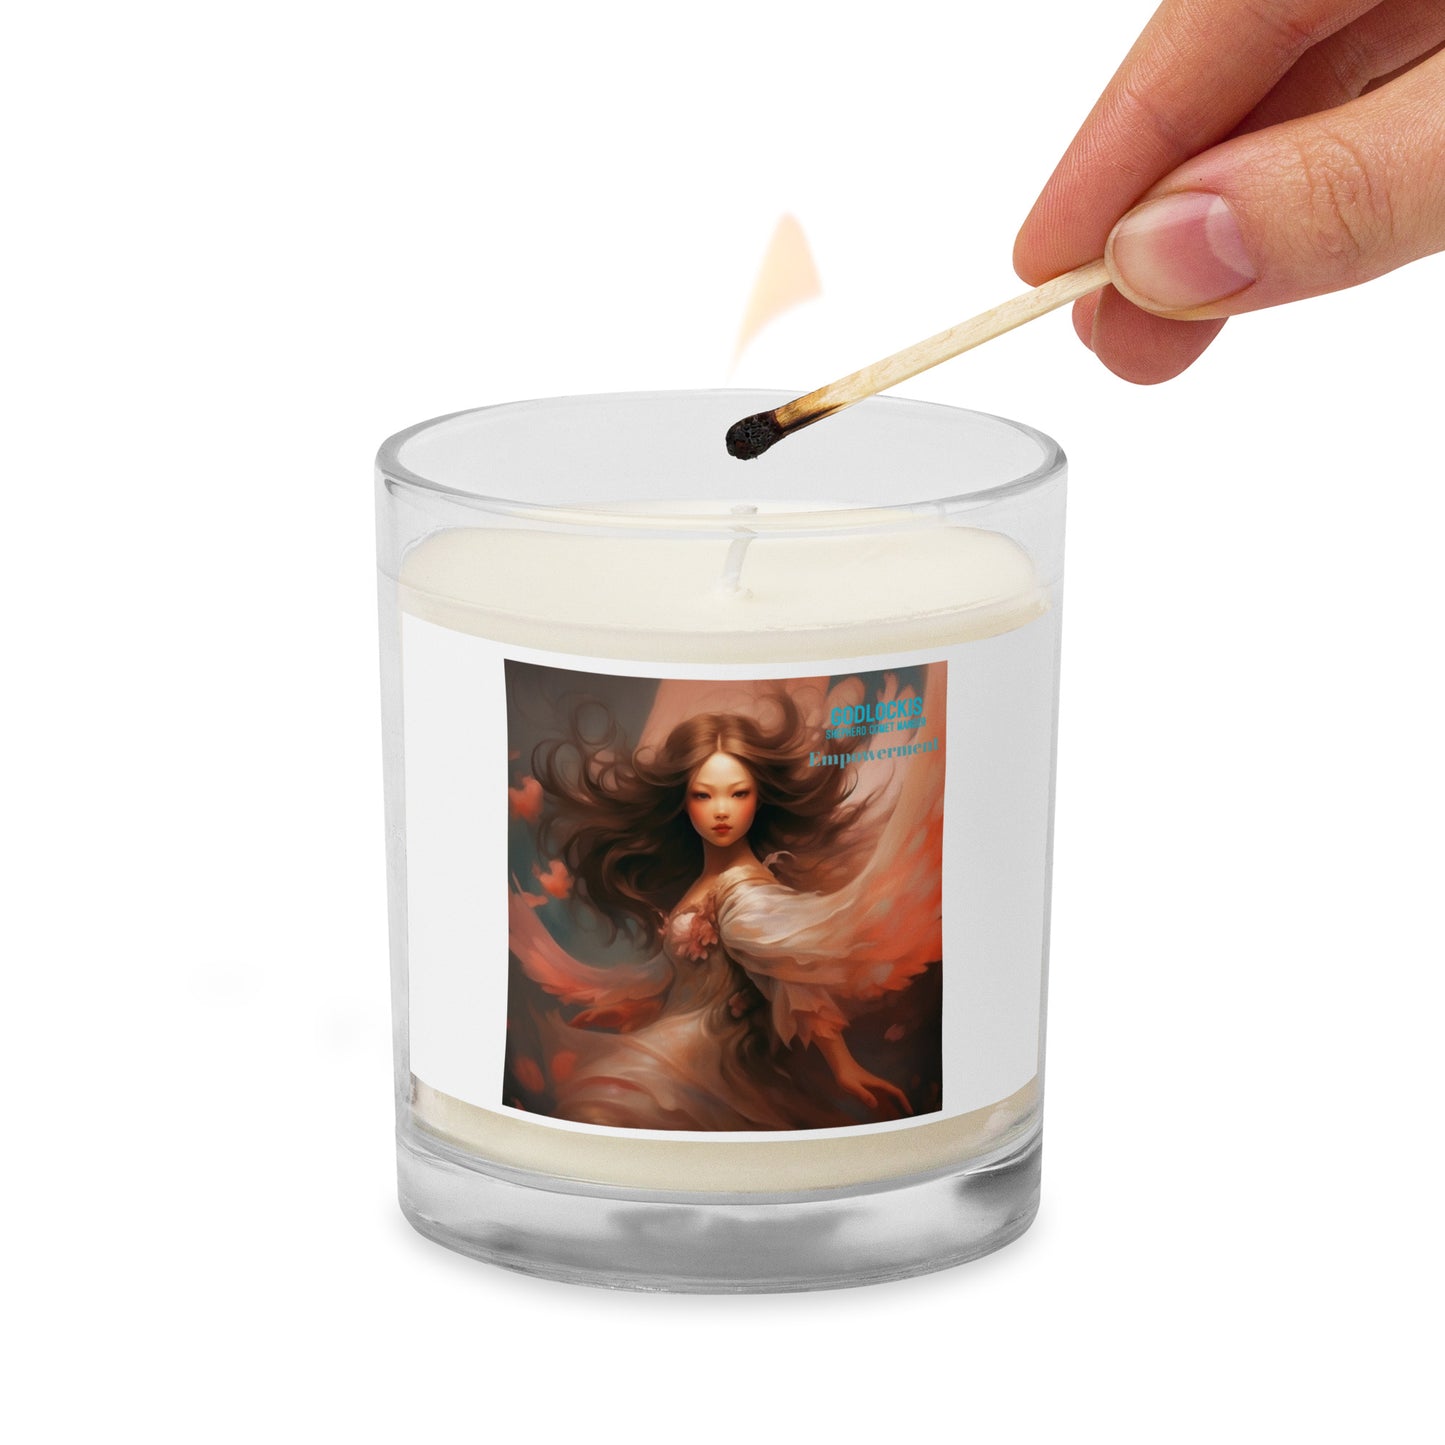 You're Awesome Empowerment Candle - Gift for Best Friends, Birthdays, and Going Away